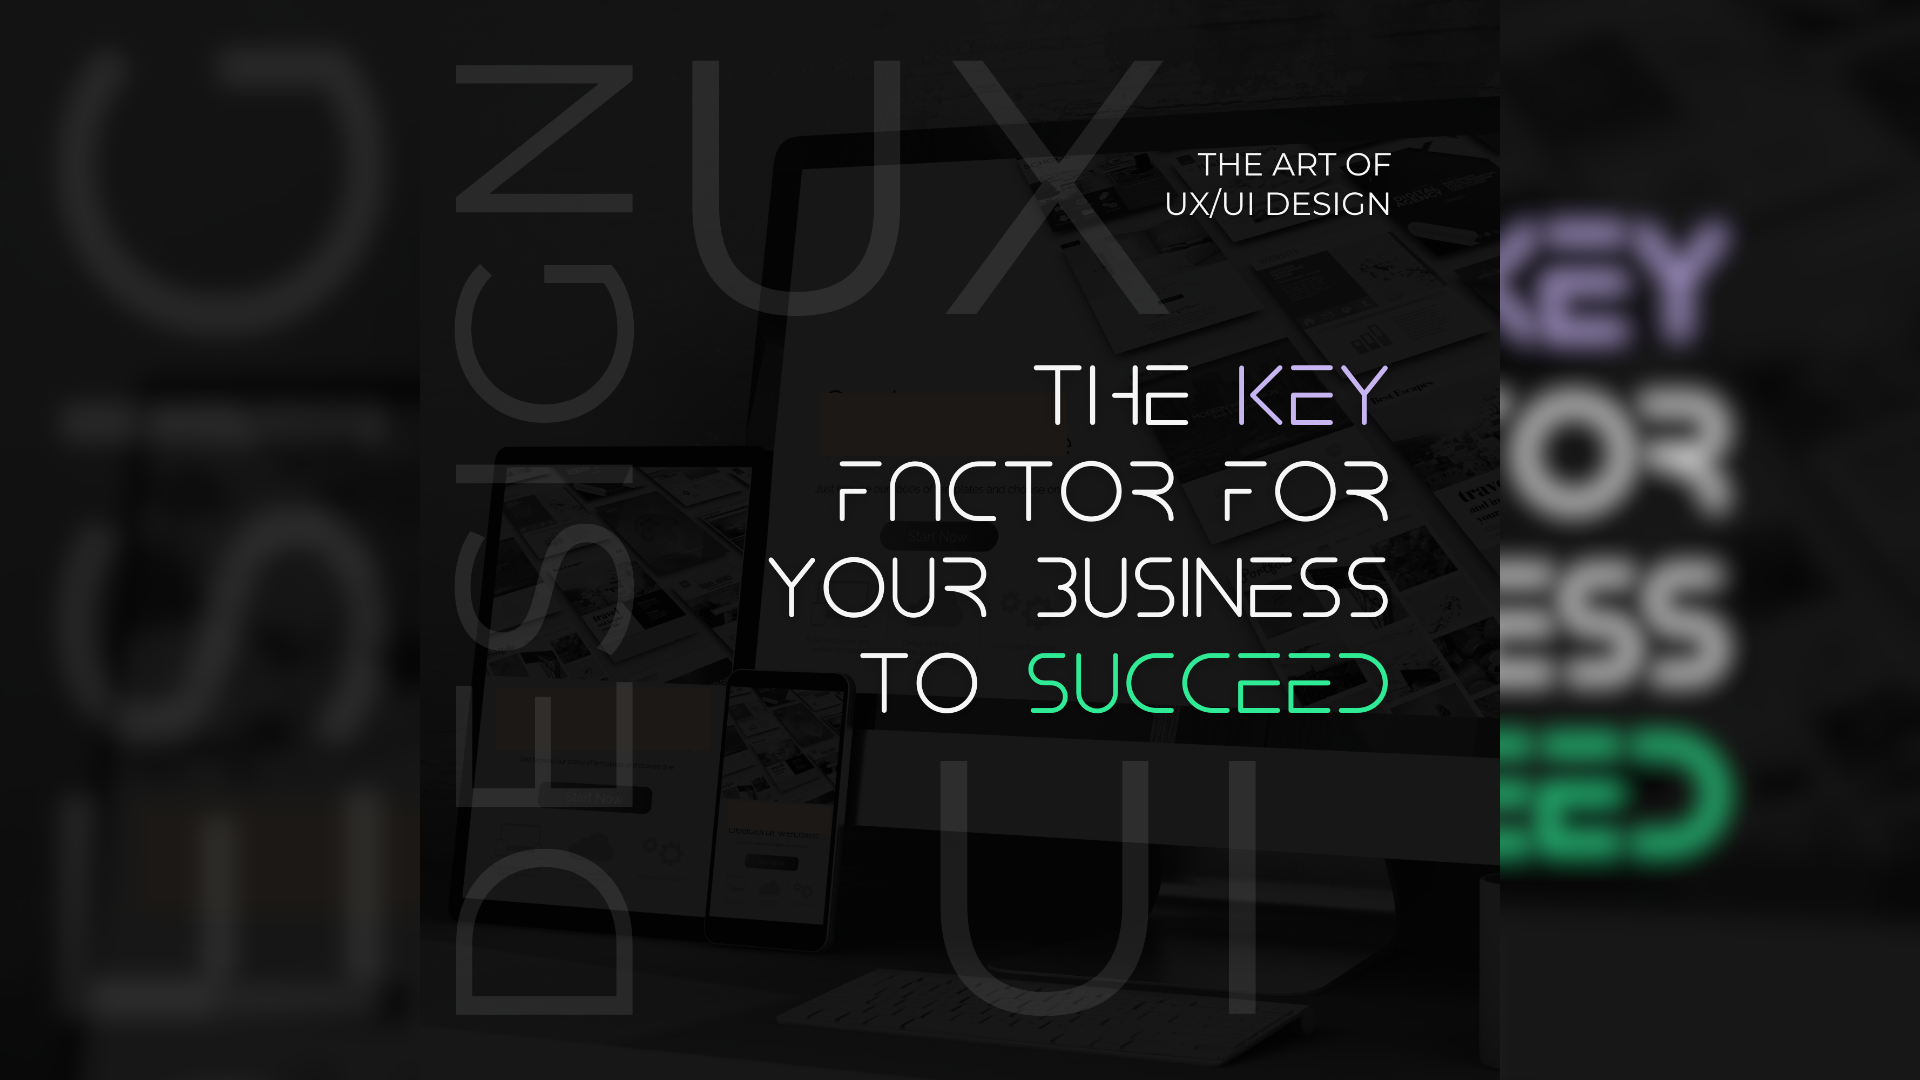 THE IMPORTANCE OF UX/UI DESIGN IN SOFTWARE, PORTAL, APPLICATION, WEBSITE AND MOBILE APPLICATION